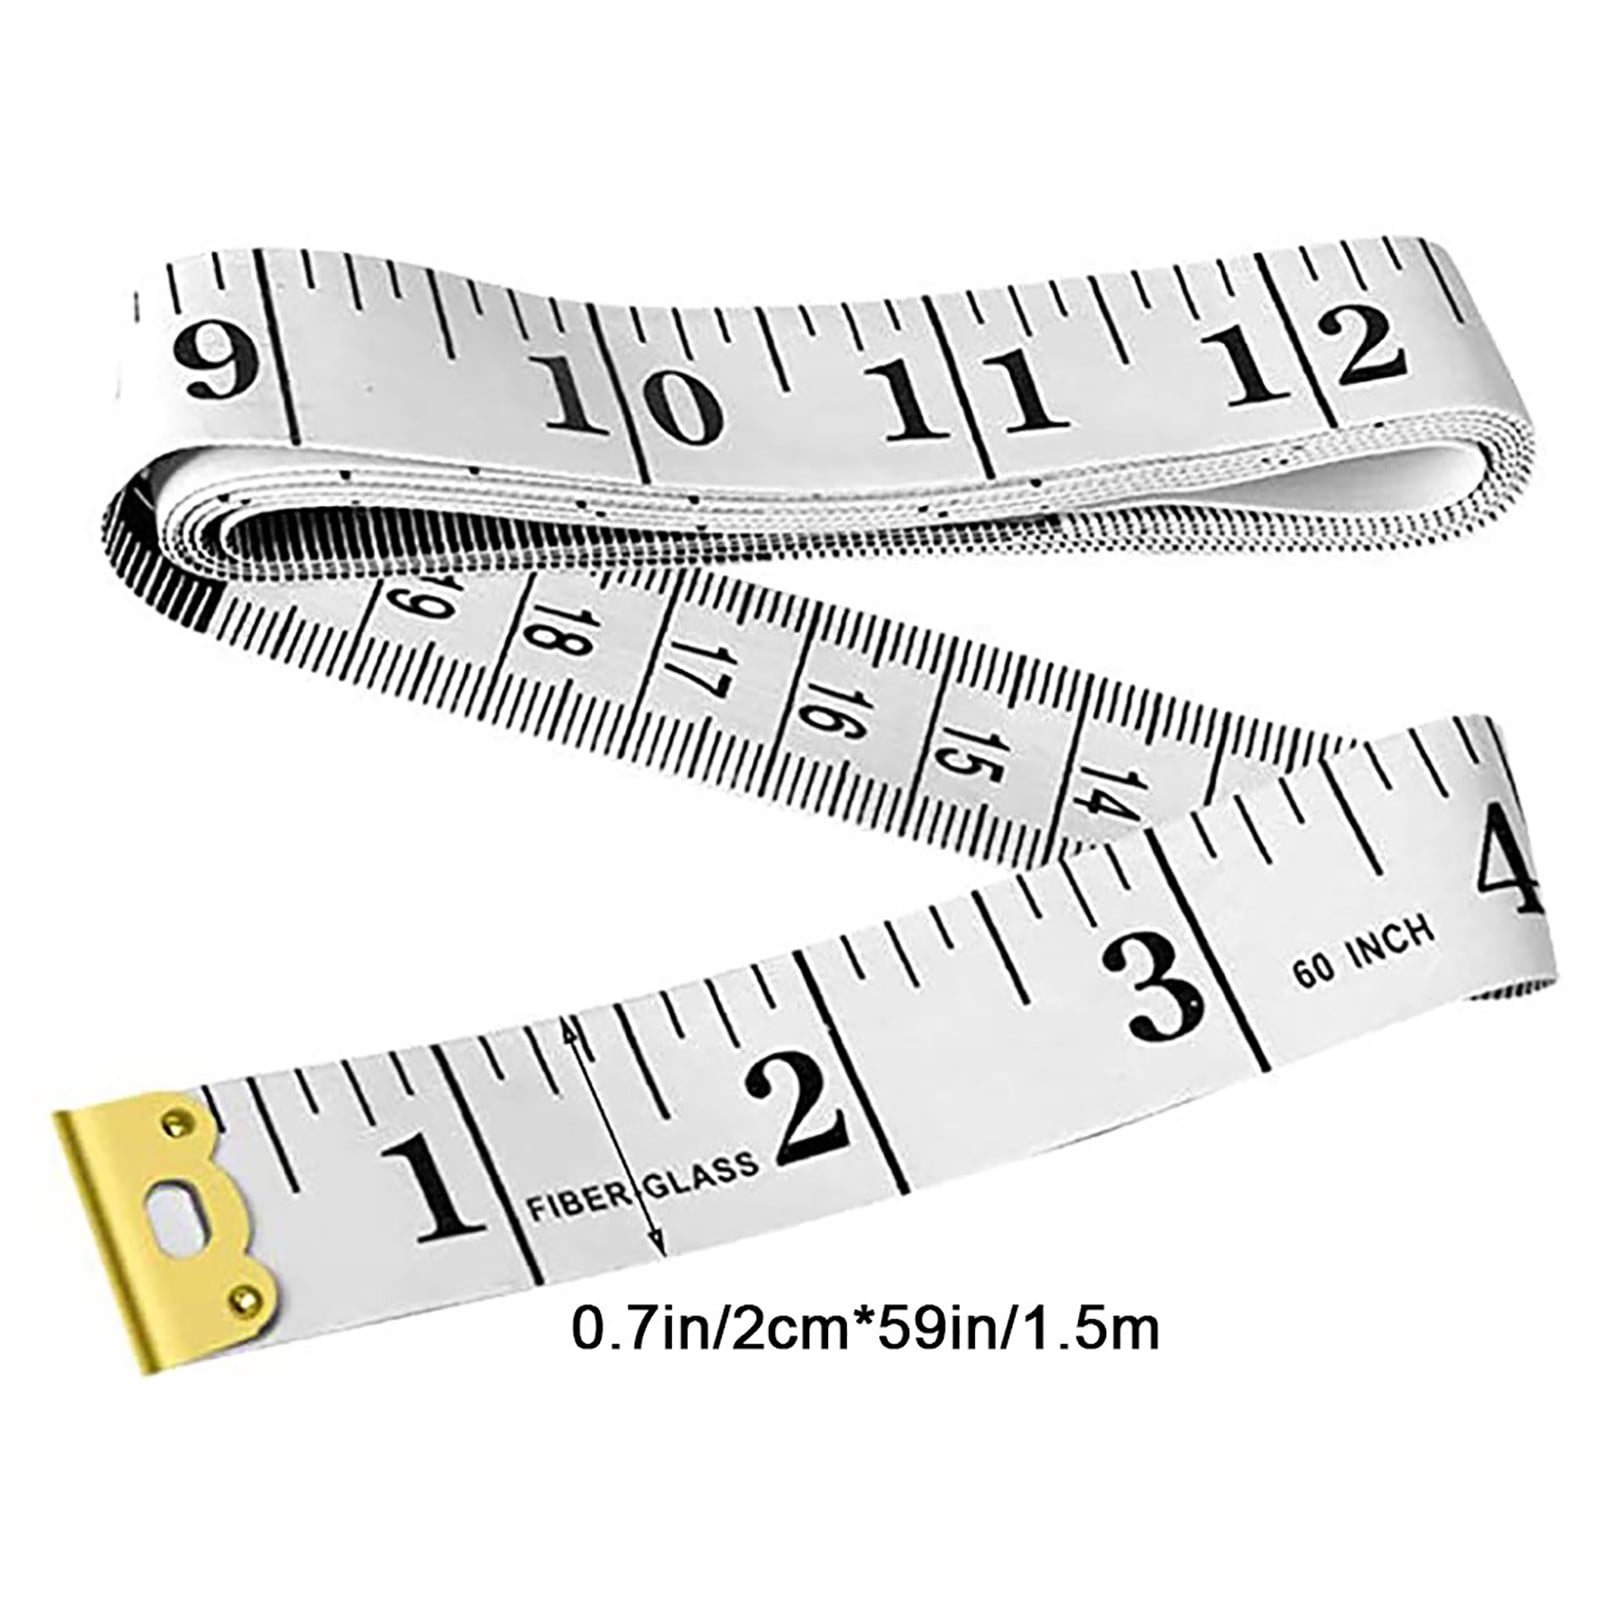 SOFT TAPE MEASURE - 60 INCH X1 — YARNS, PATTERNS, ACCESSORIES